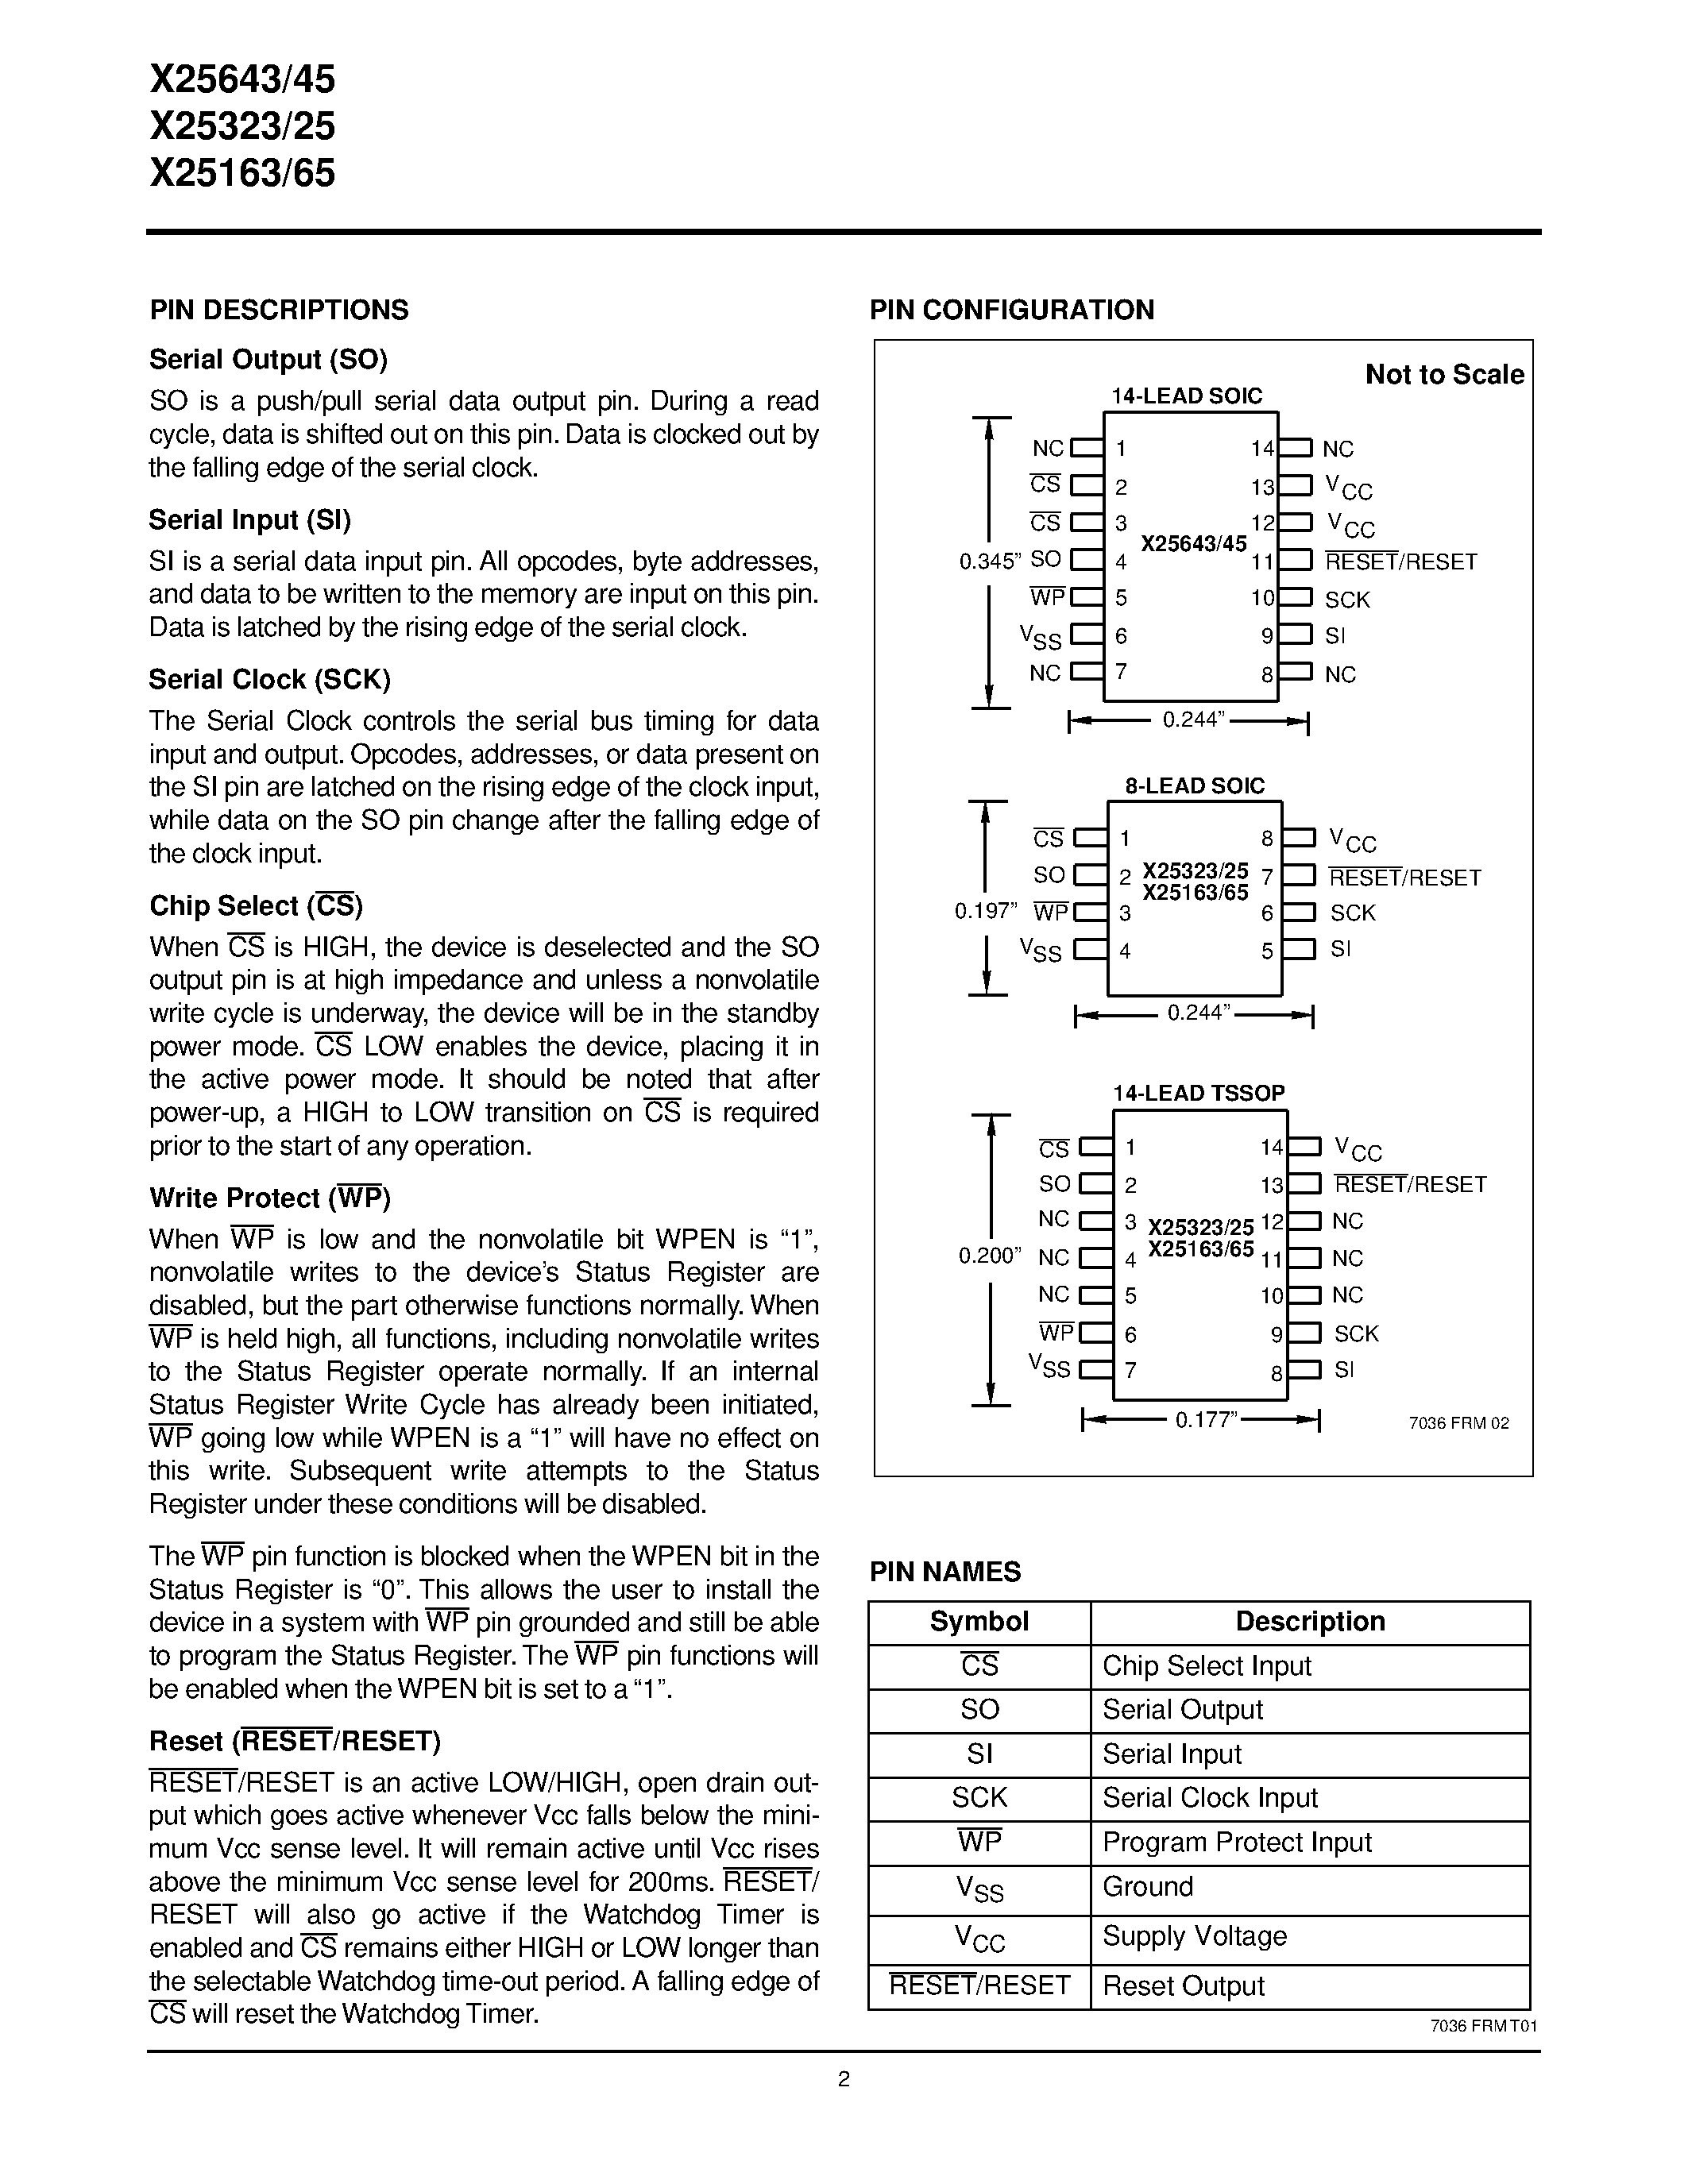 Datasheet X25325V14-1.8 - Programmable Watchdog Timer & V CC Supervisory Circuit w/Serial E 2 PROM page 2